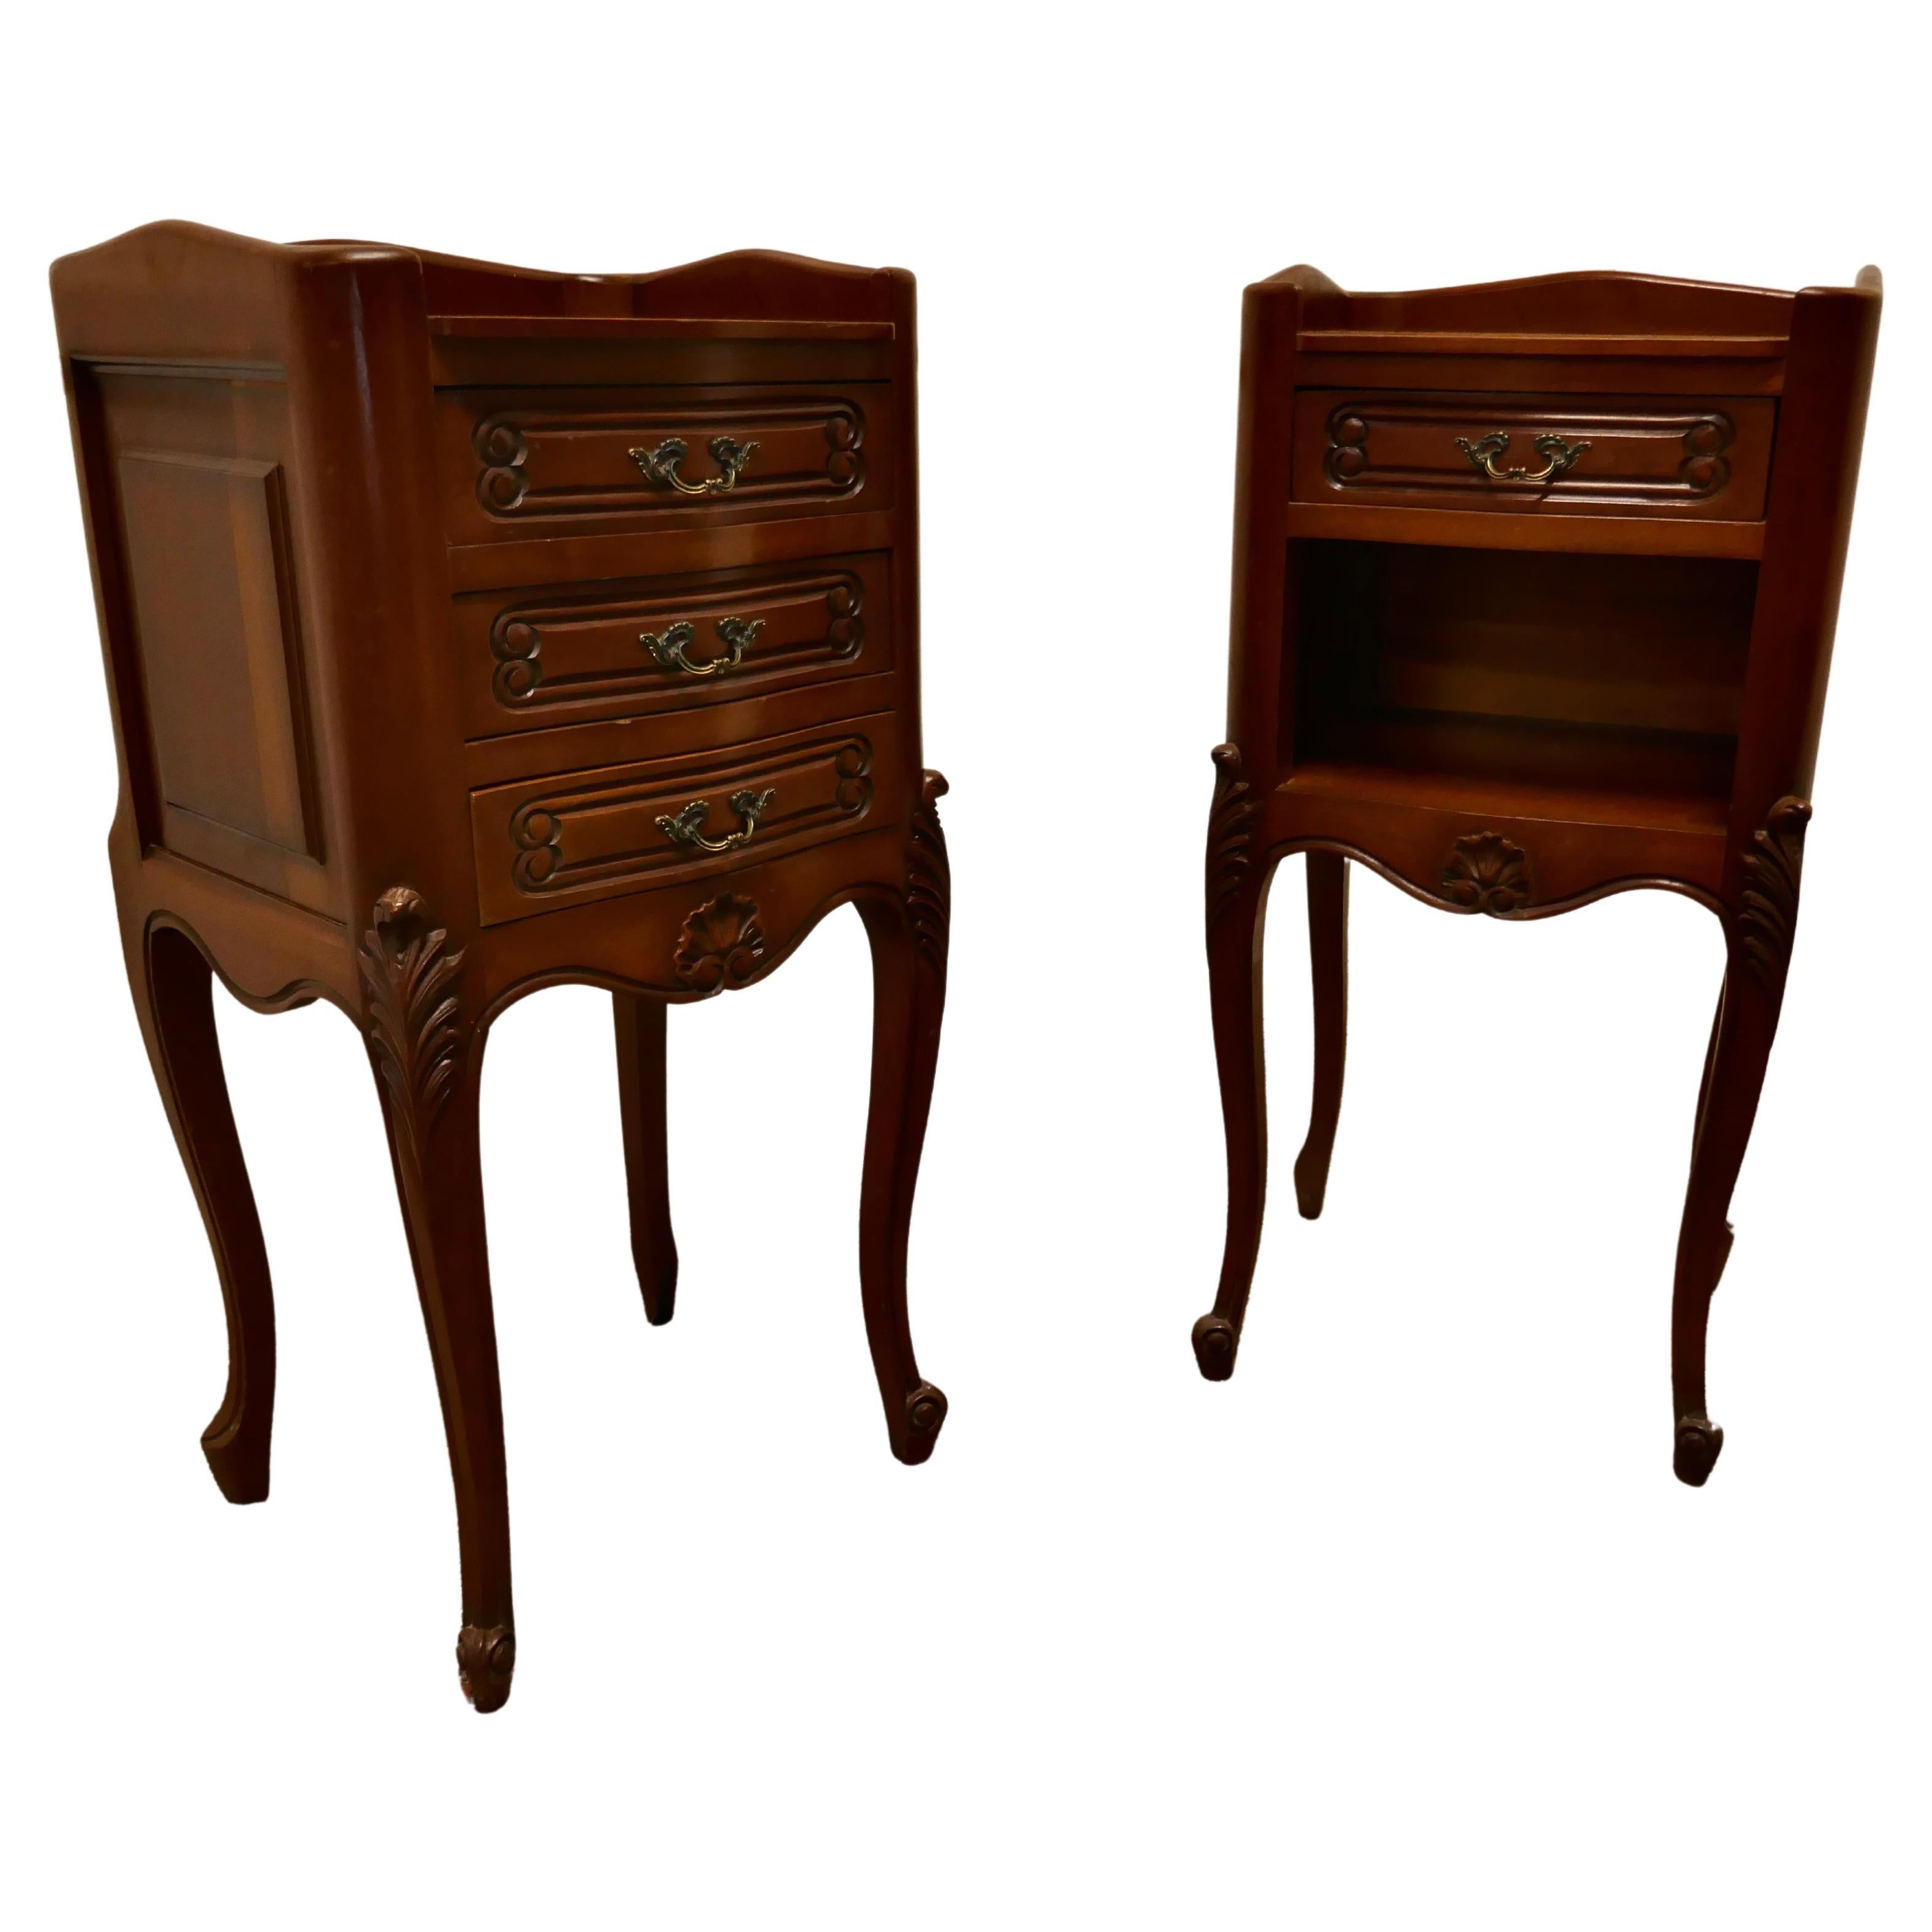 Pair of French Cherry Wood Bedside Cabinets or Cupboards